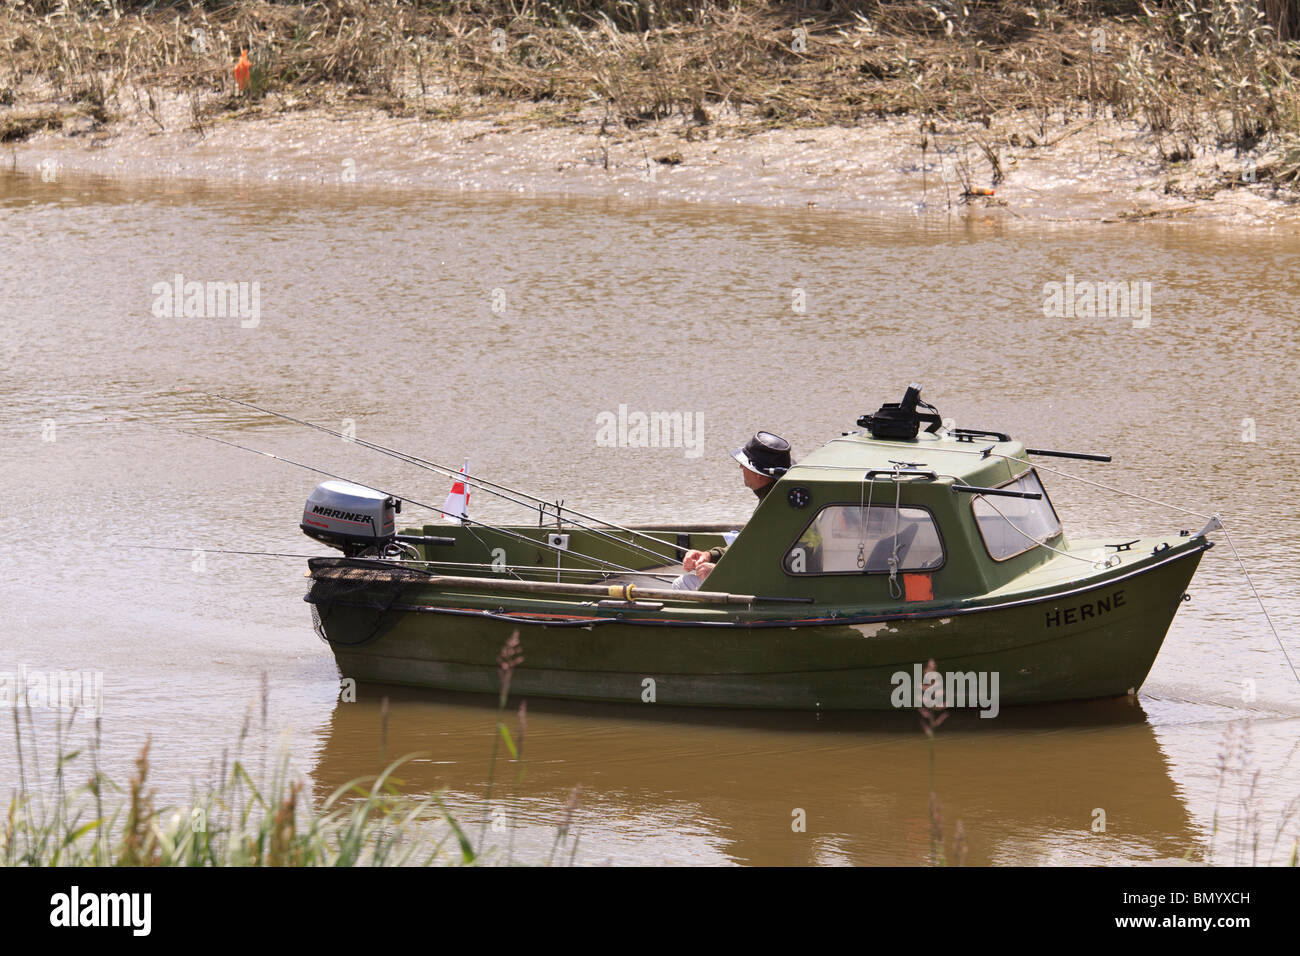 https://c8.alamy.com/comp/BMYXCH/small-motor-fishing-boat-with-one-fisherman-and-many-fishing-rods-BMYXCH.jpg